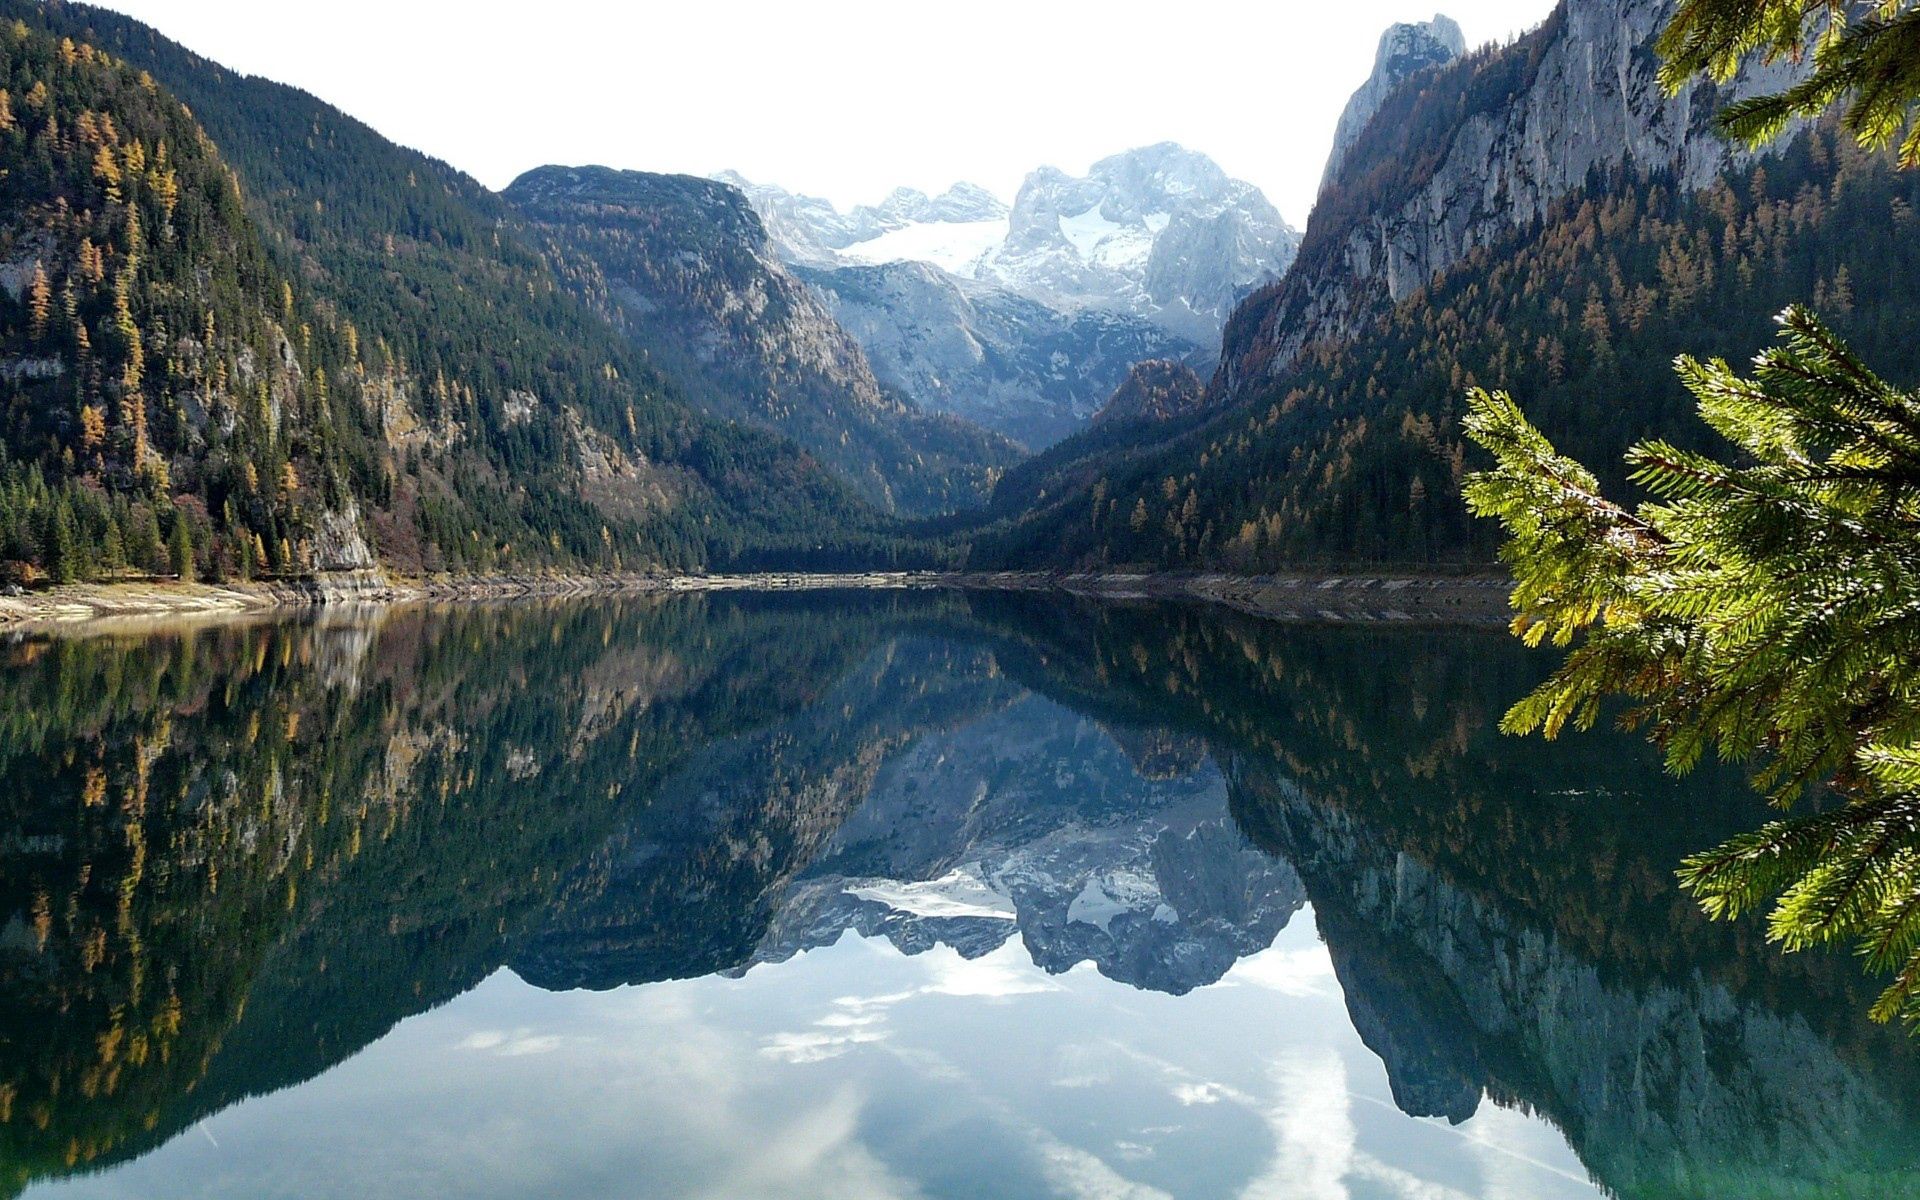 mountains, nature, trees, lake, reflection, branches, branch, water surface, mirror